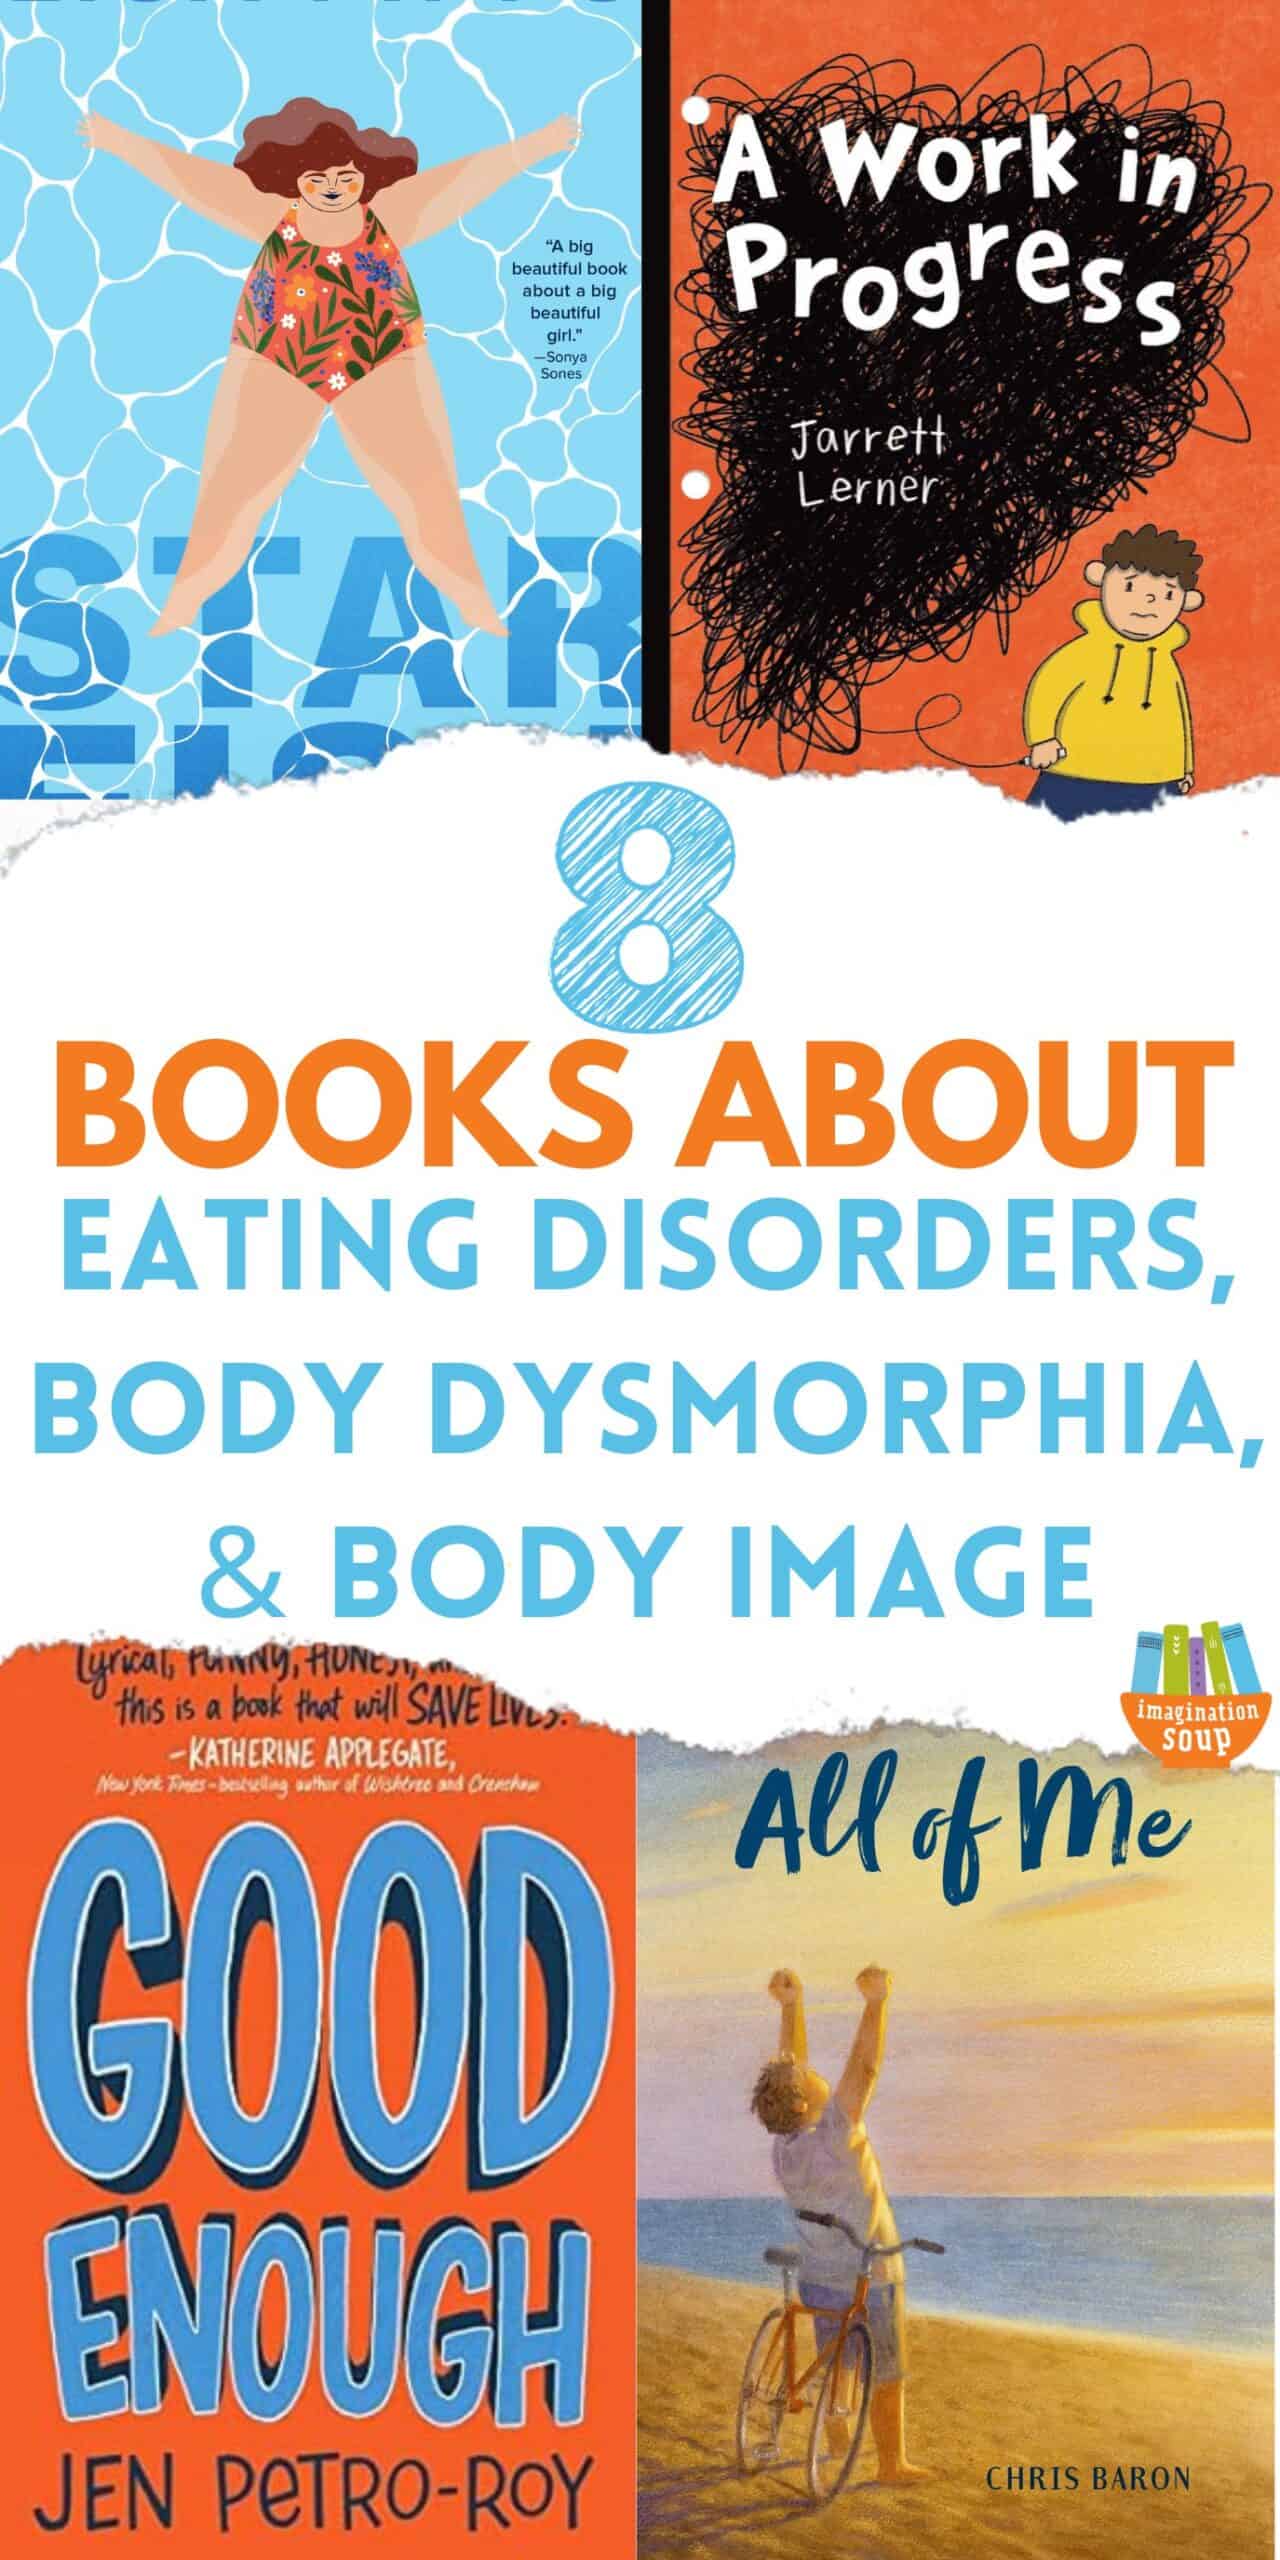 books about eating disorders, body dysmorphia, and body image